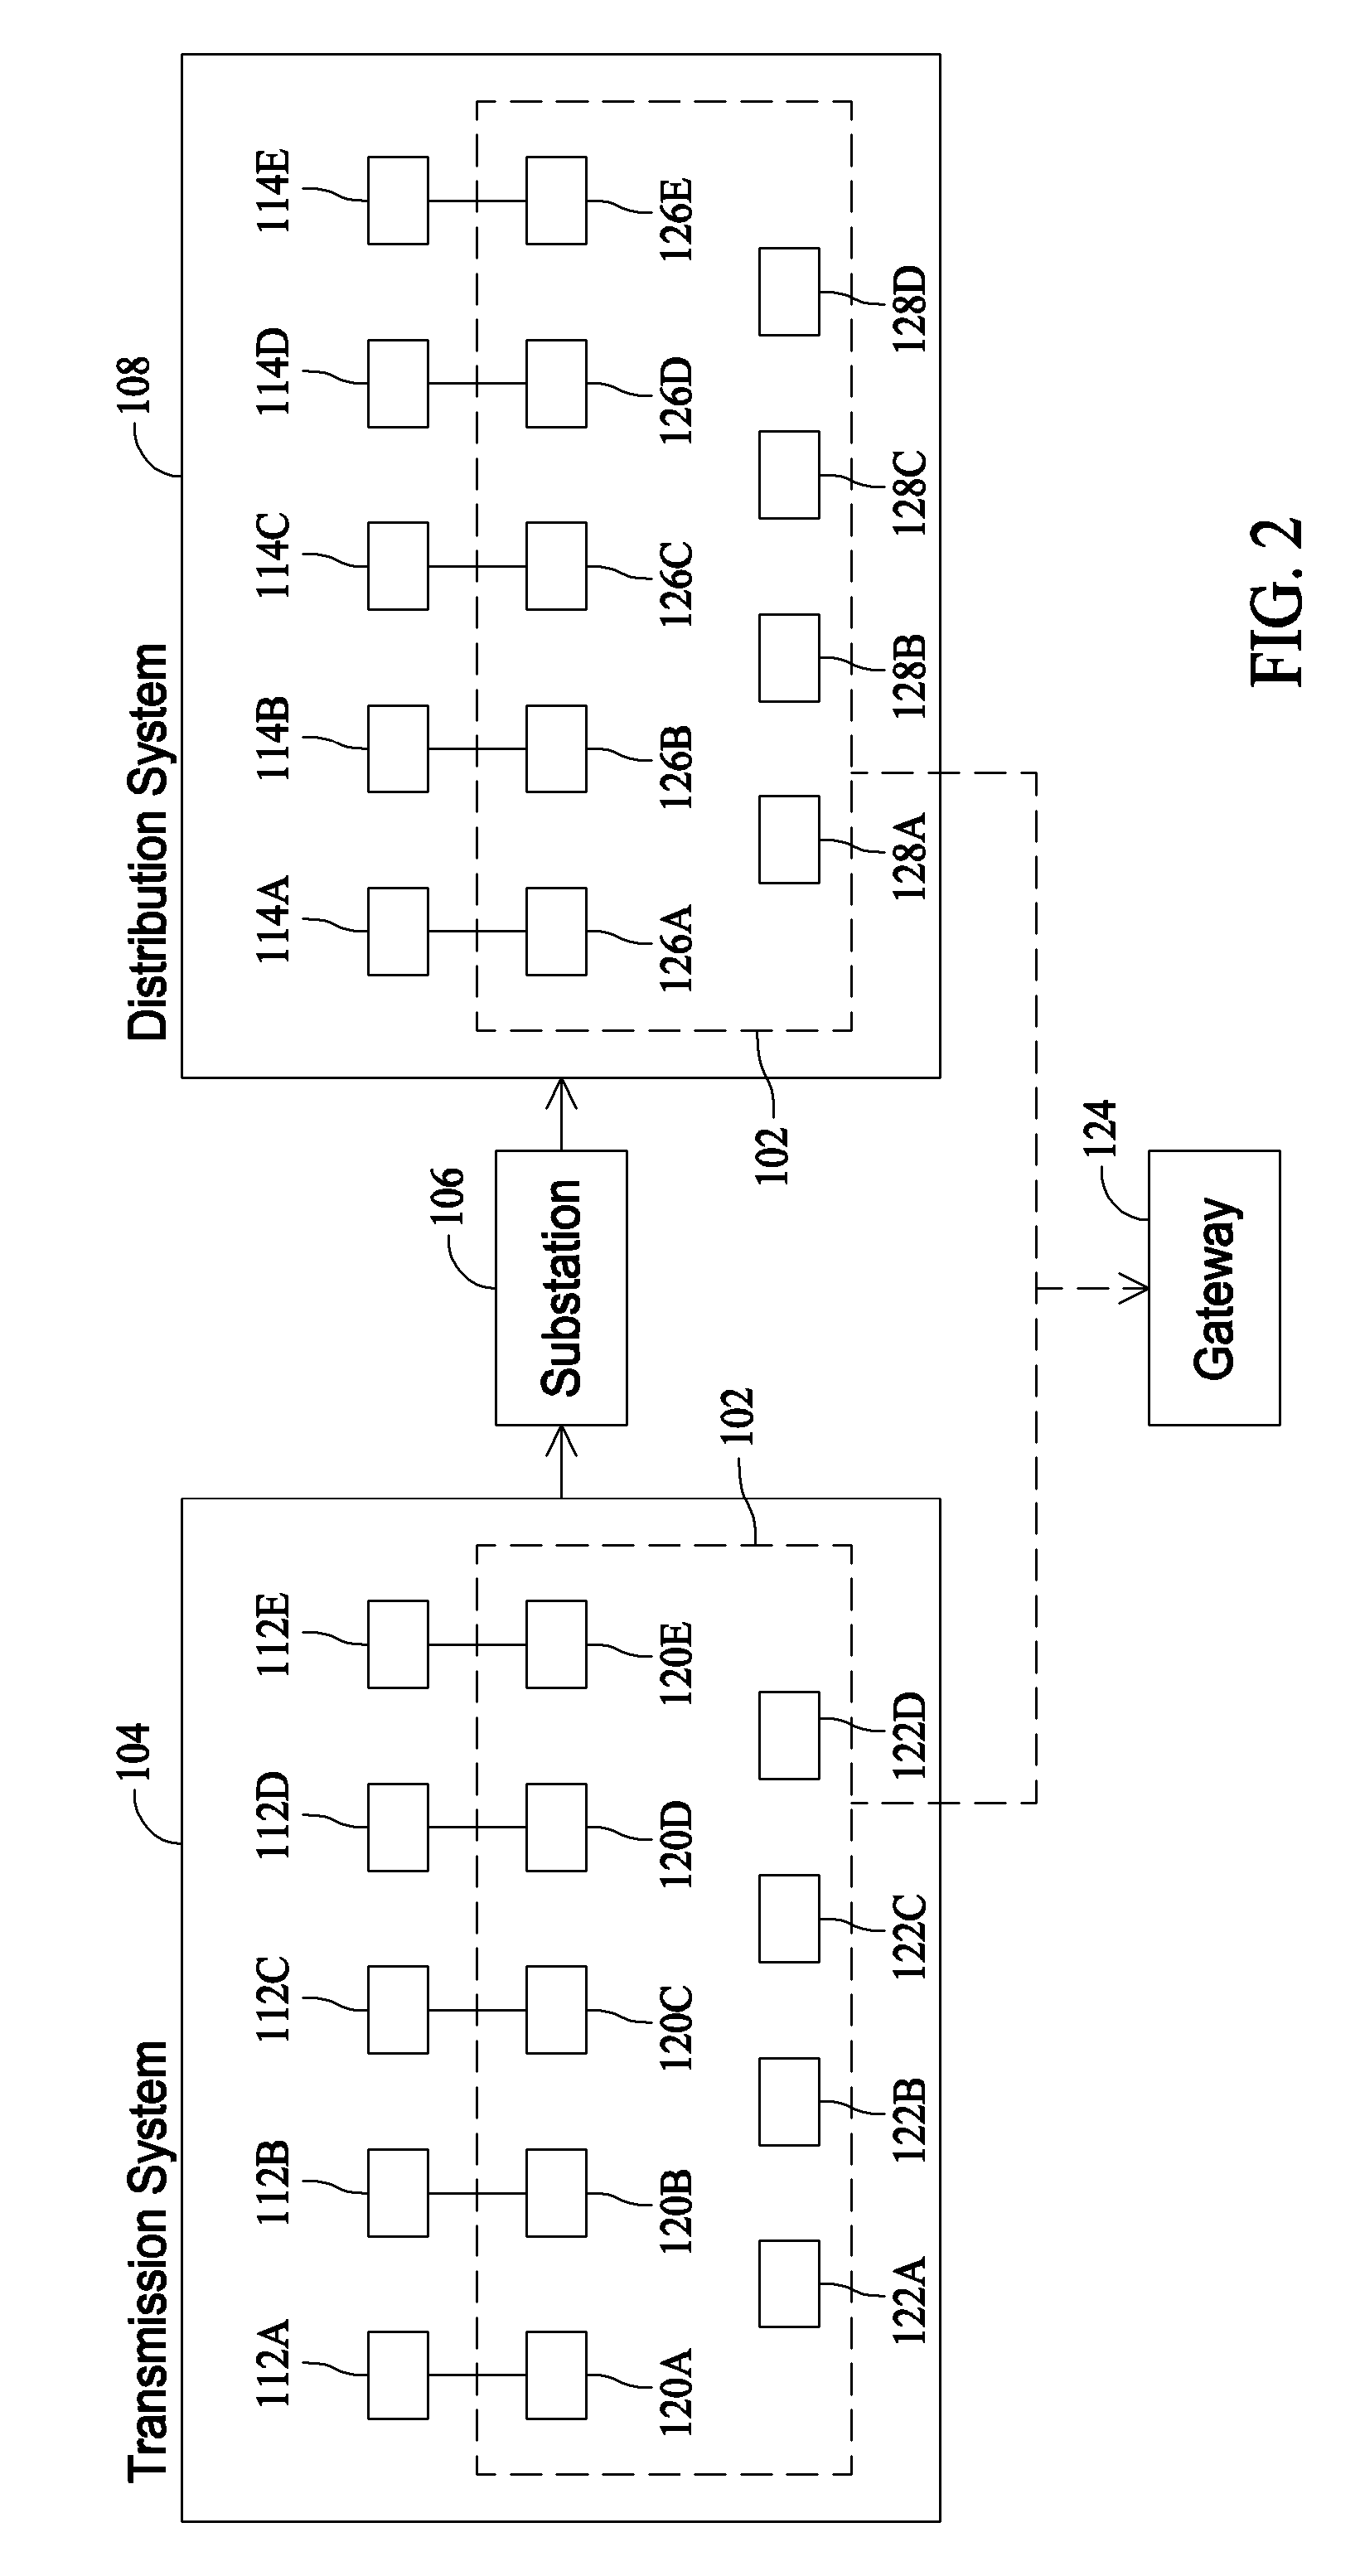 Electrical power system control communications network